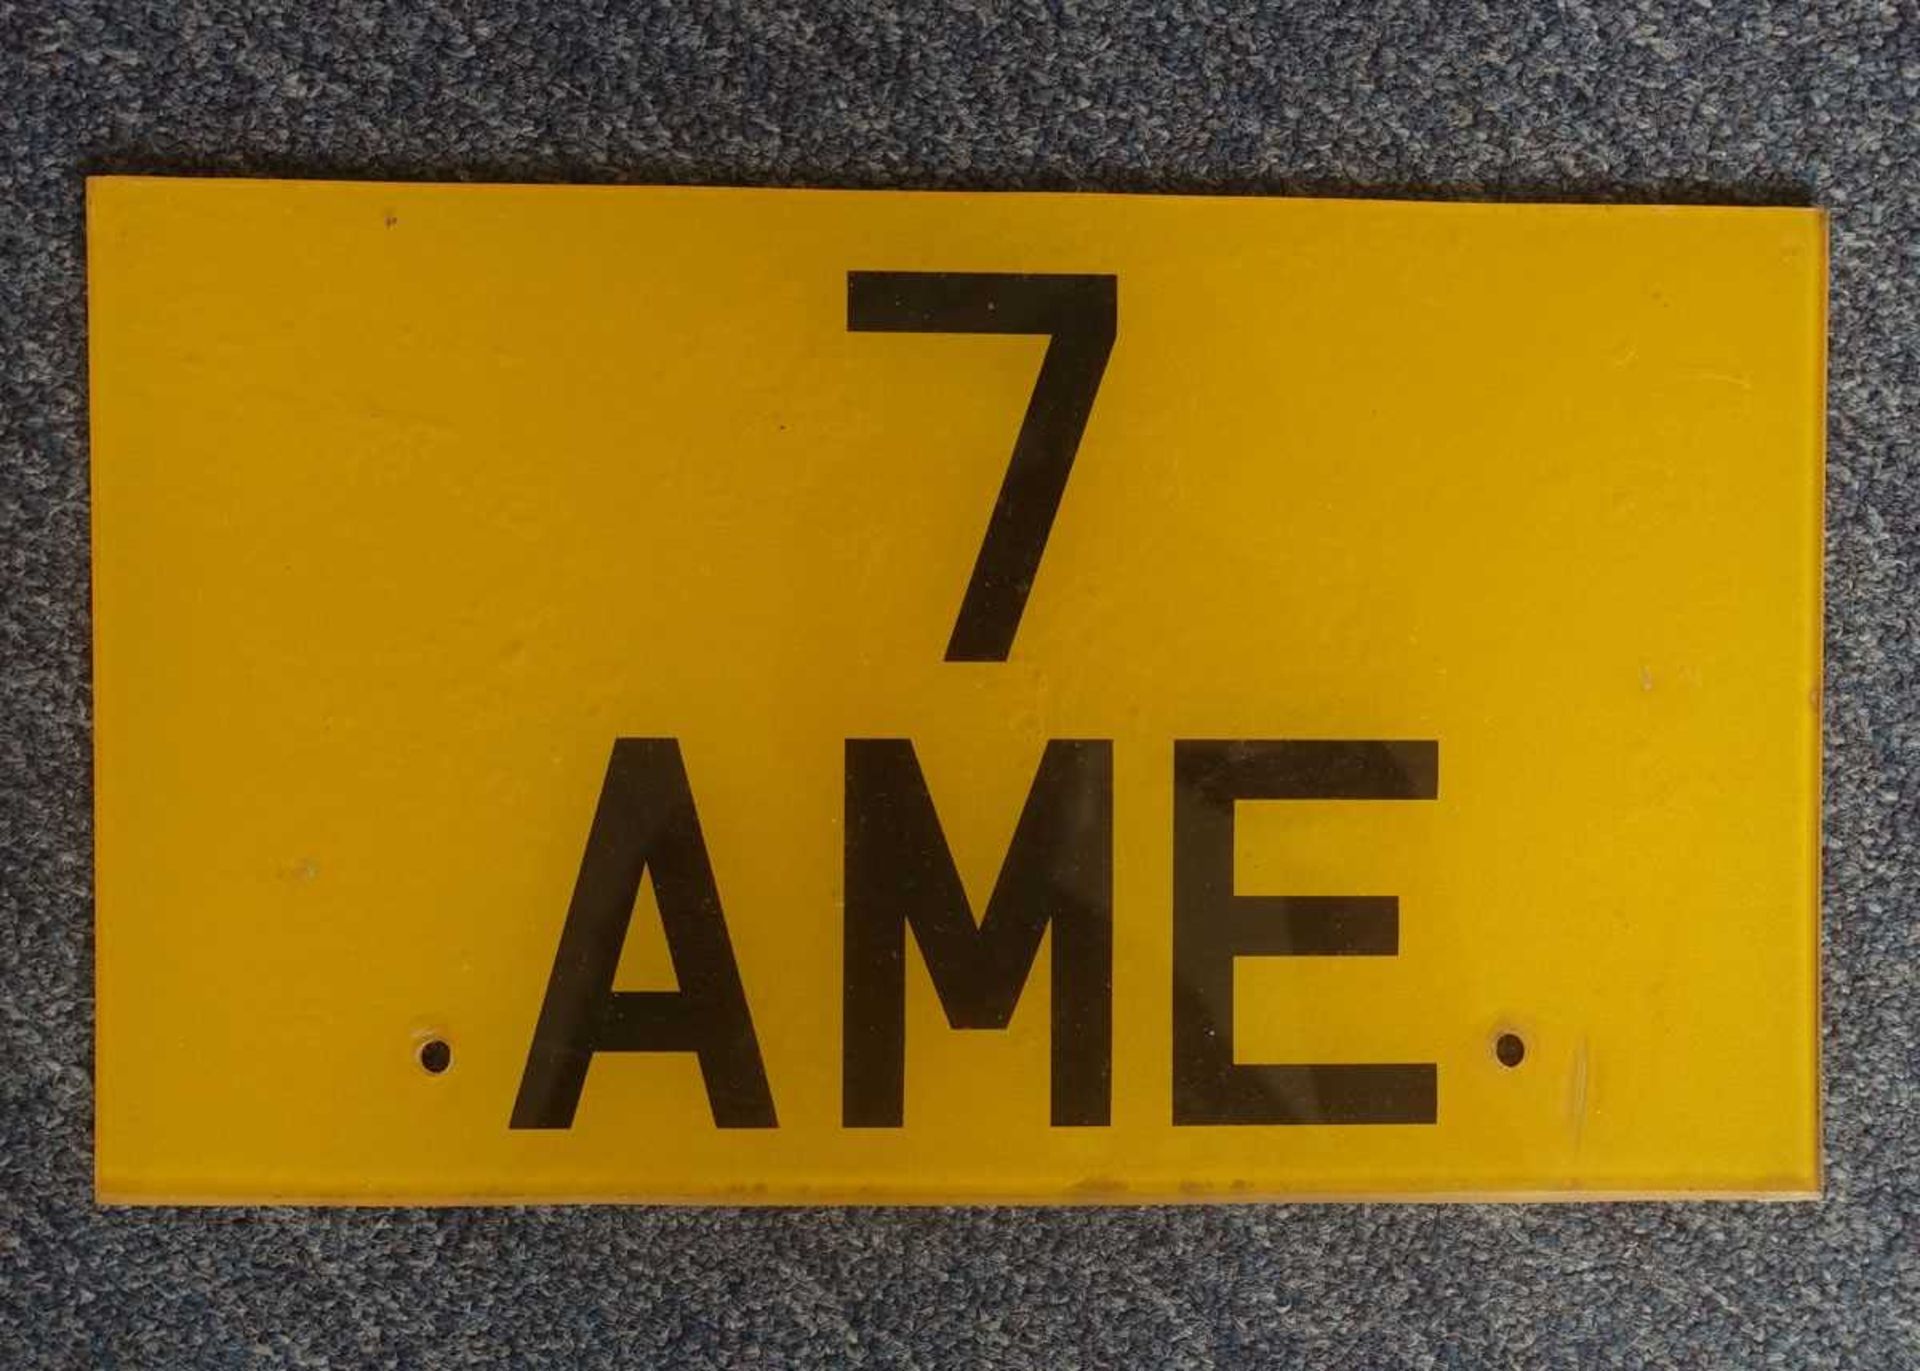 Cherished number plate on retention document (V778): "7 AME"